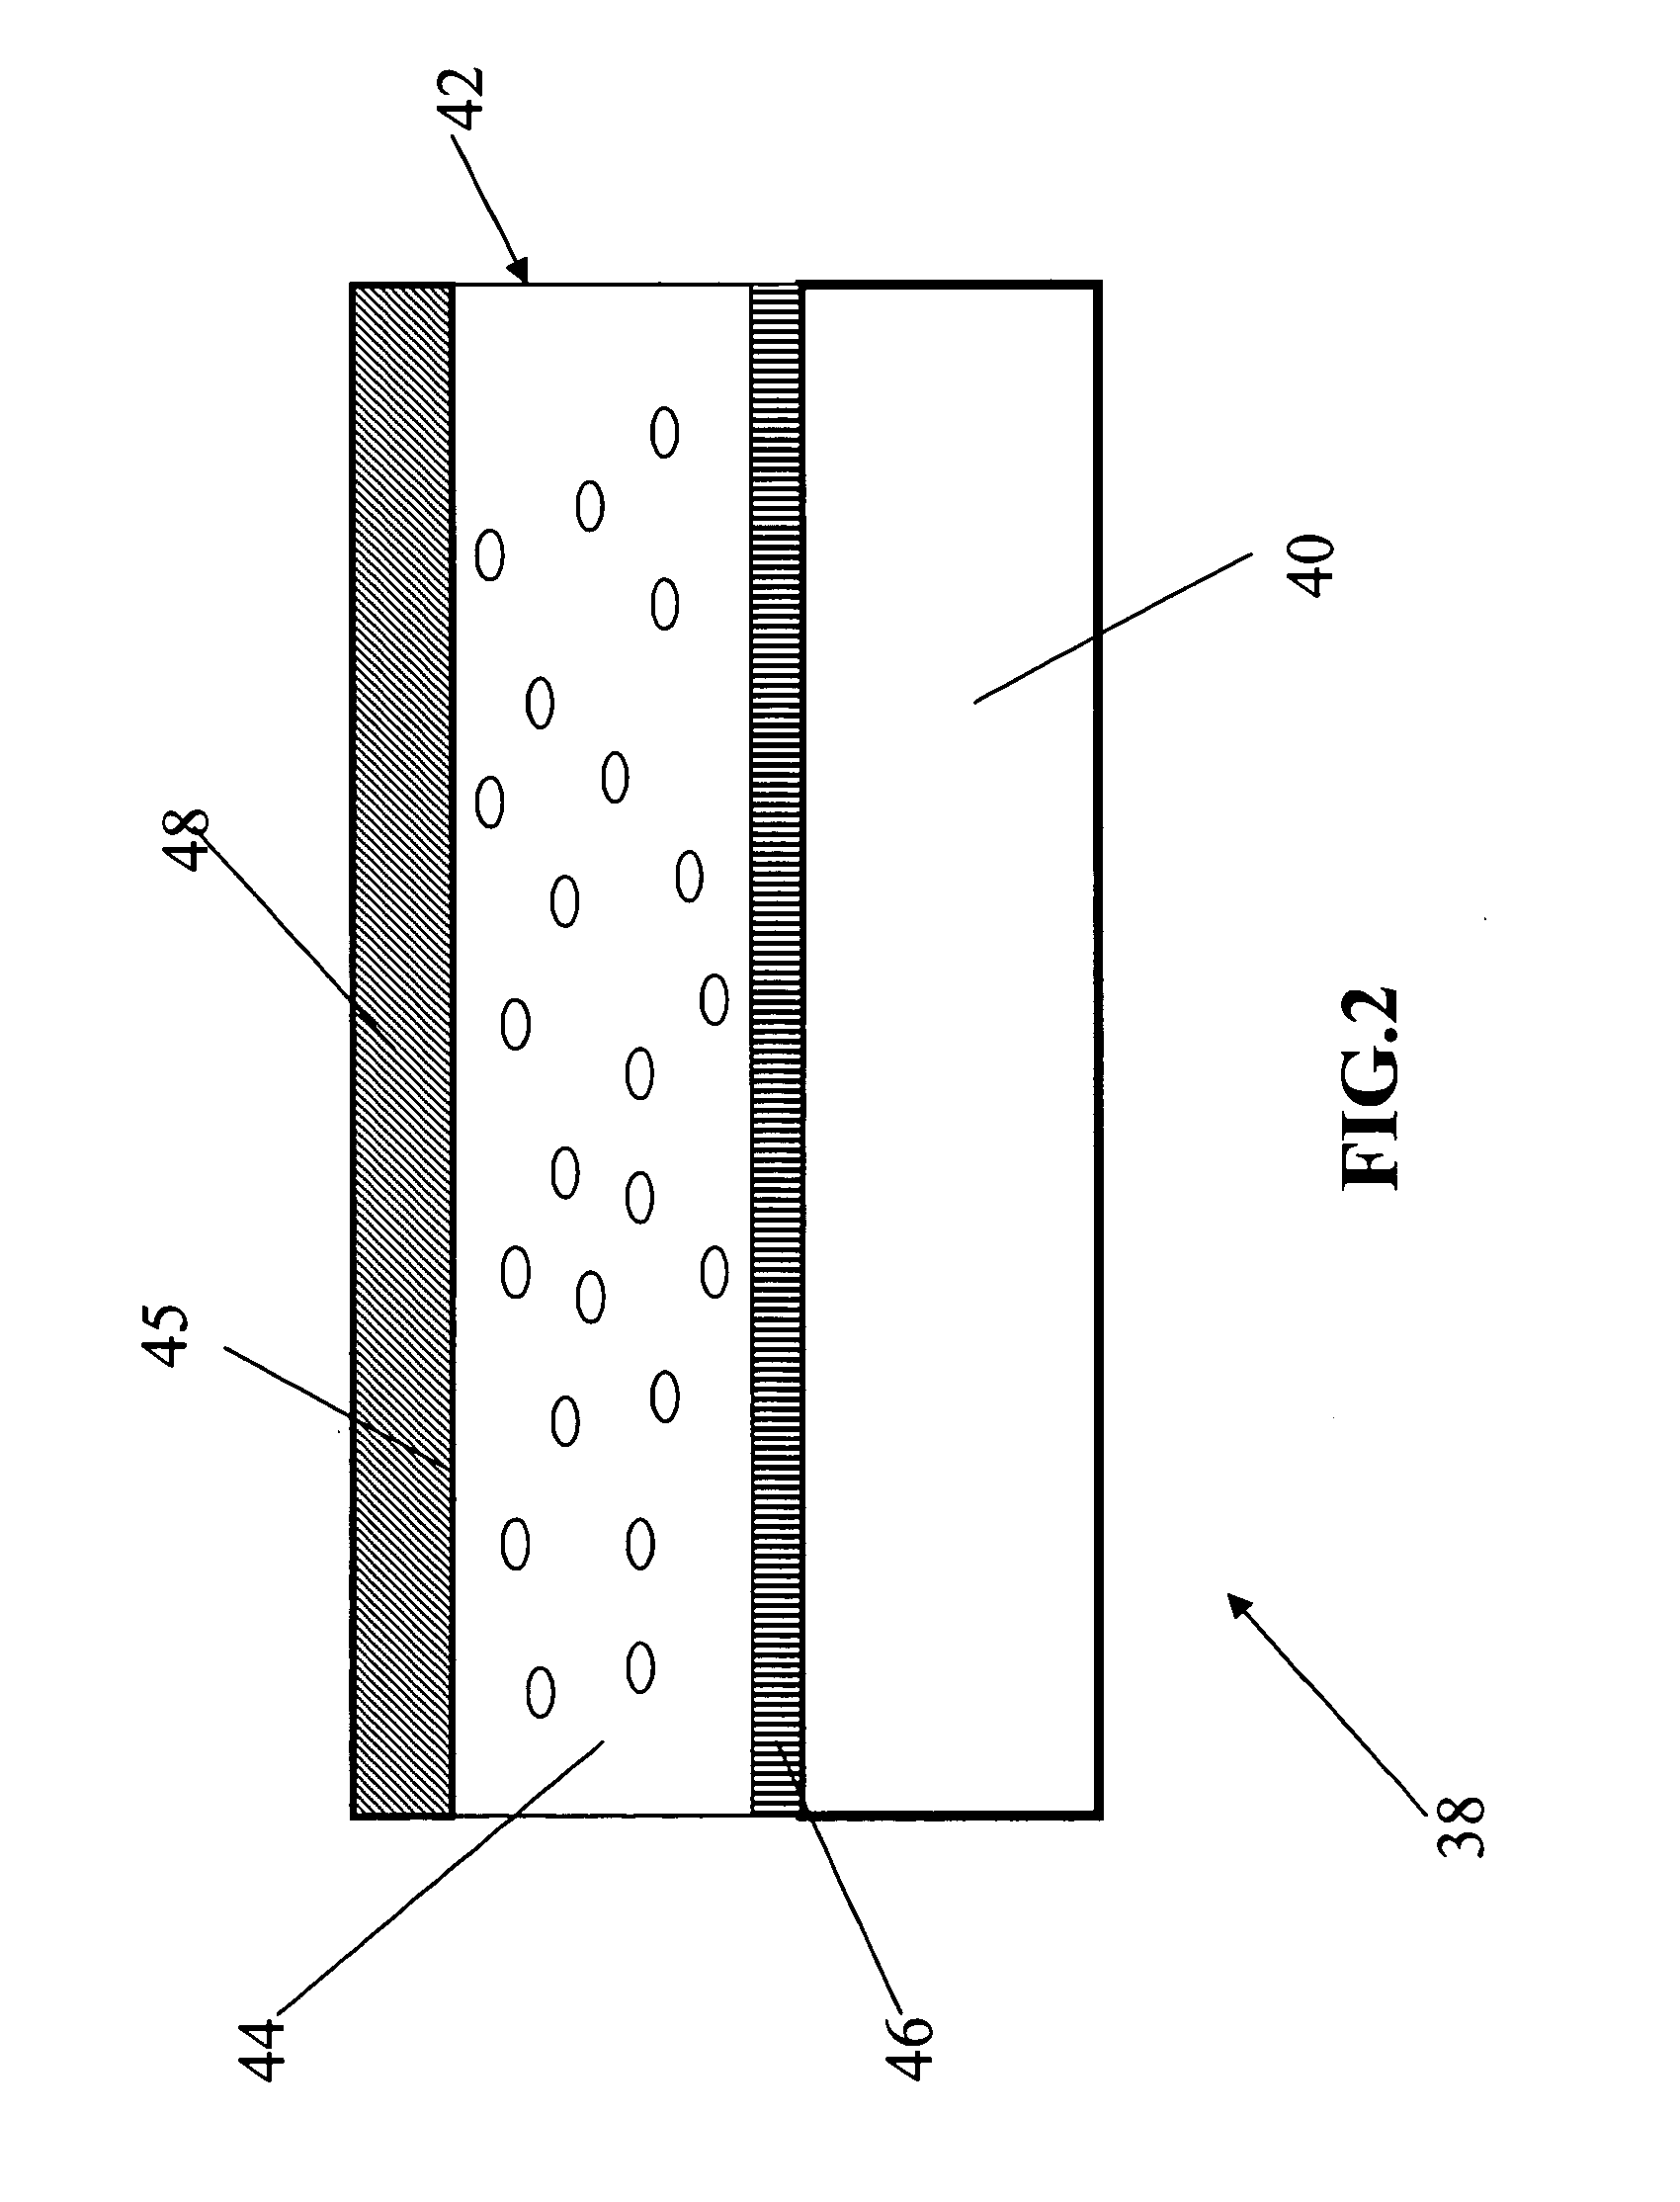 Self-cooled photo-voltaic device and method for intensification of cooling thereof